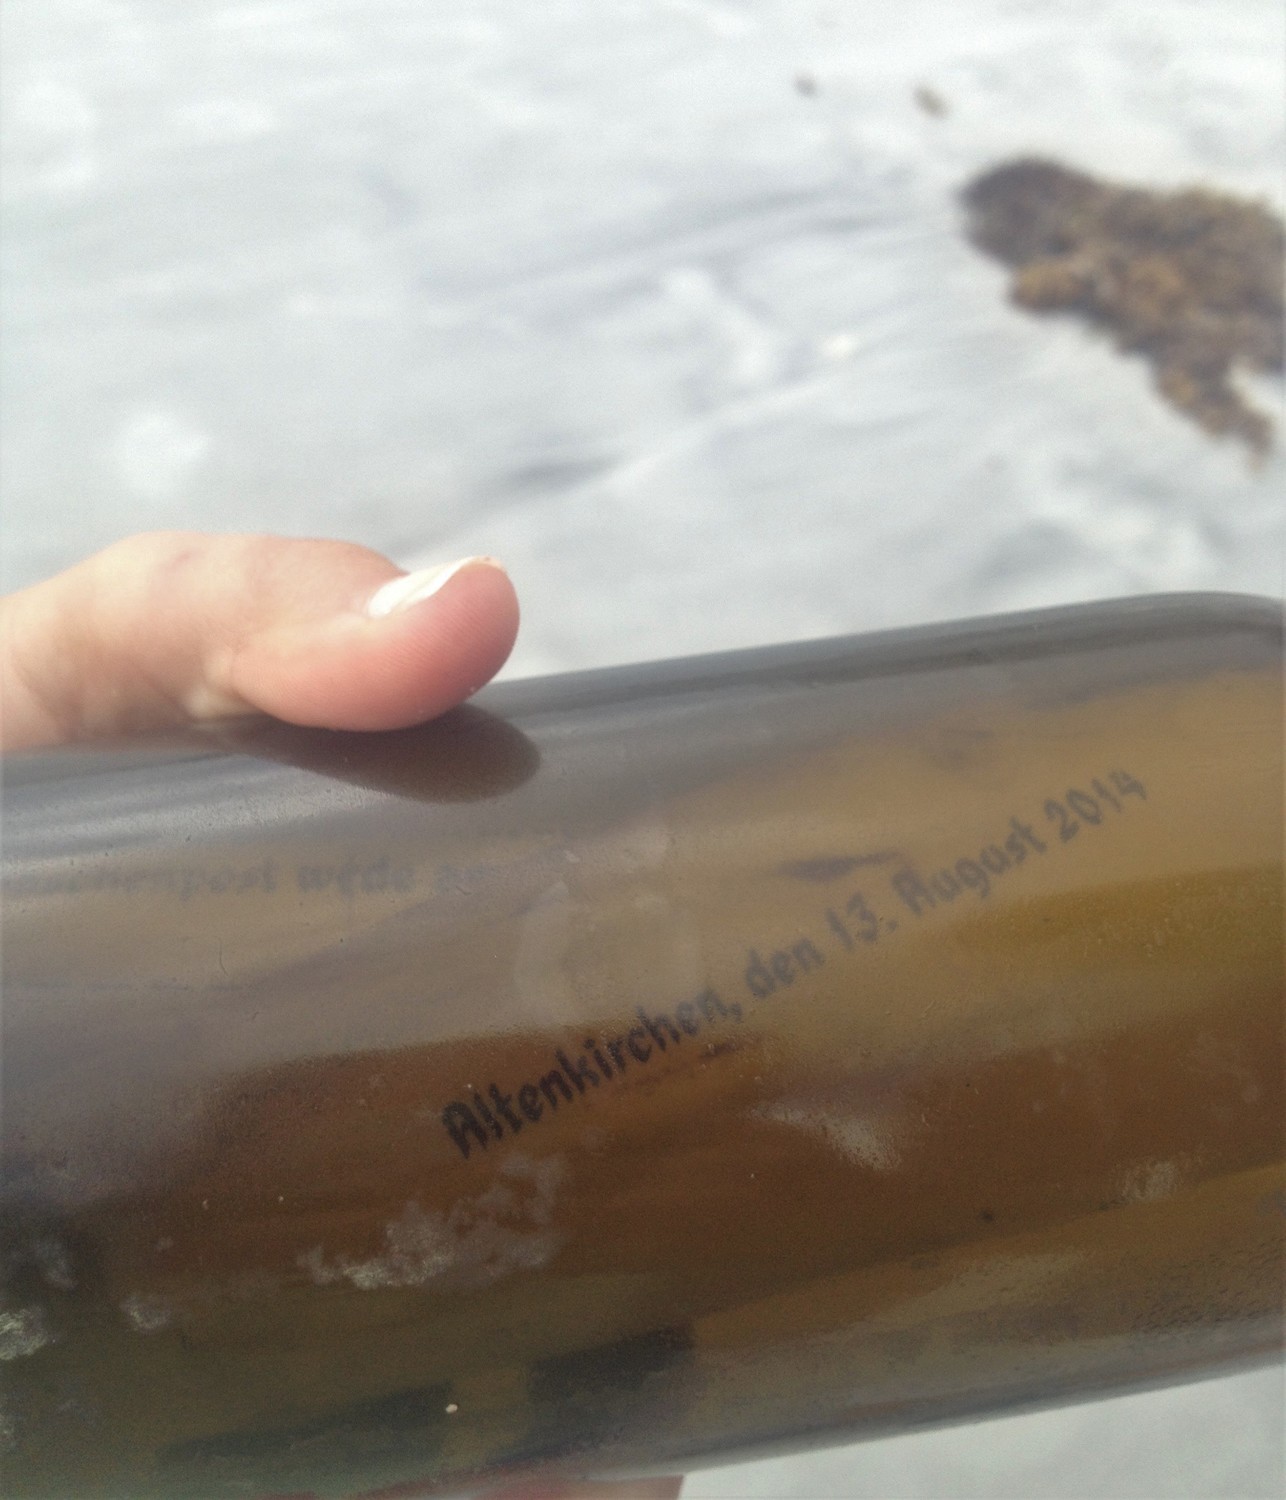 A message, written in German and dated Aug. 13, 2014, is found inside a glass bottle on the beach.